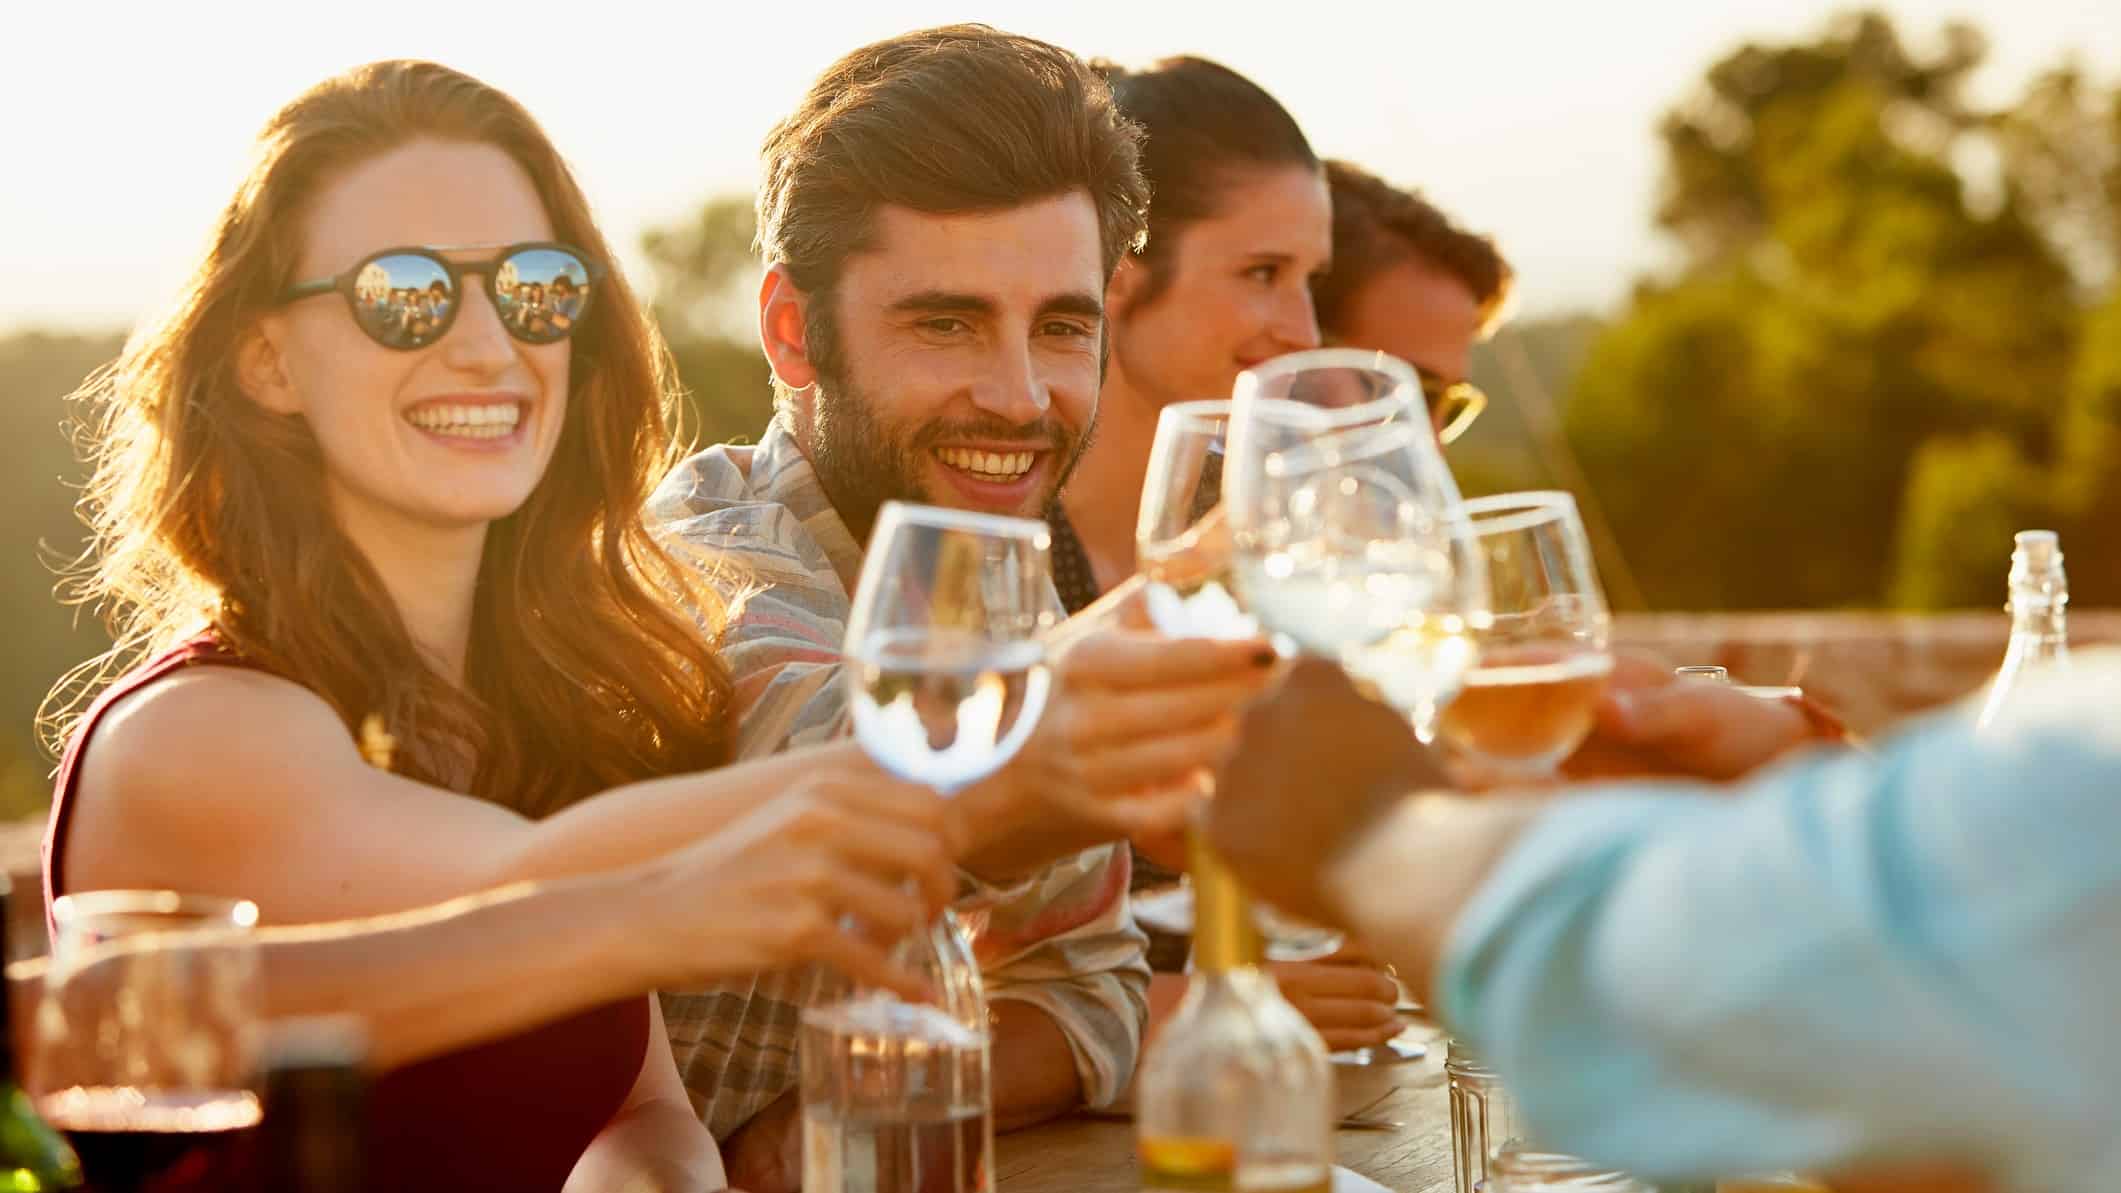 a group of people clink wine glasses in an outdoor, late afternoon setting.